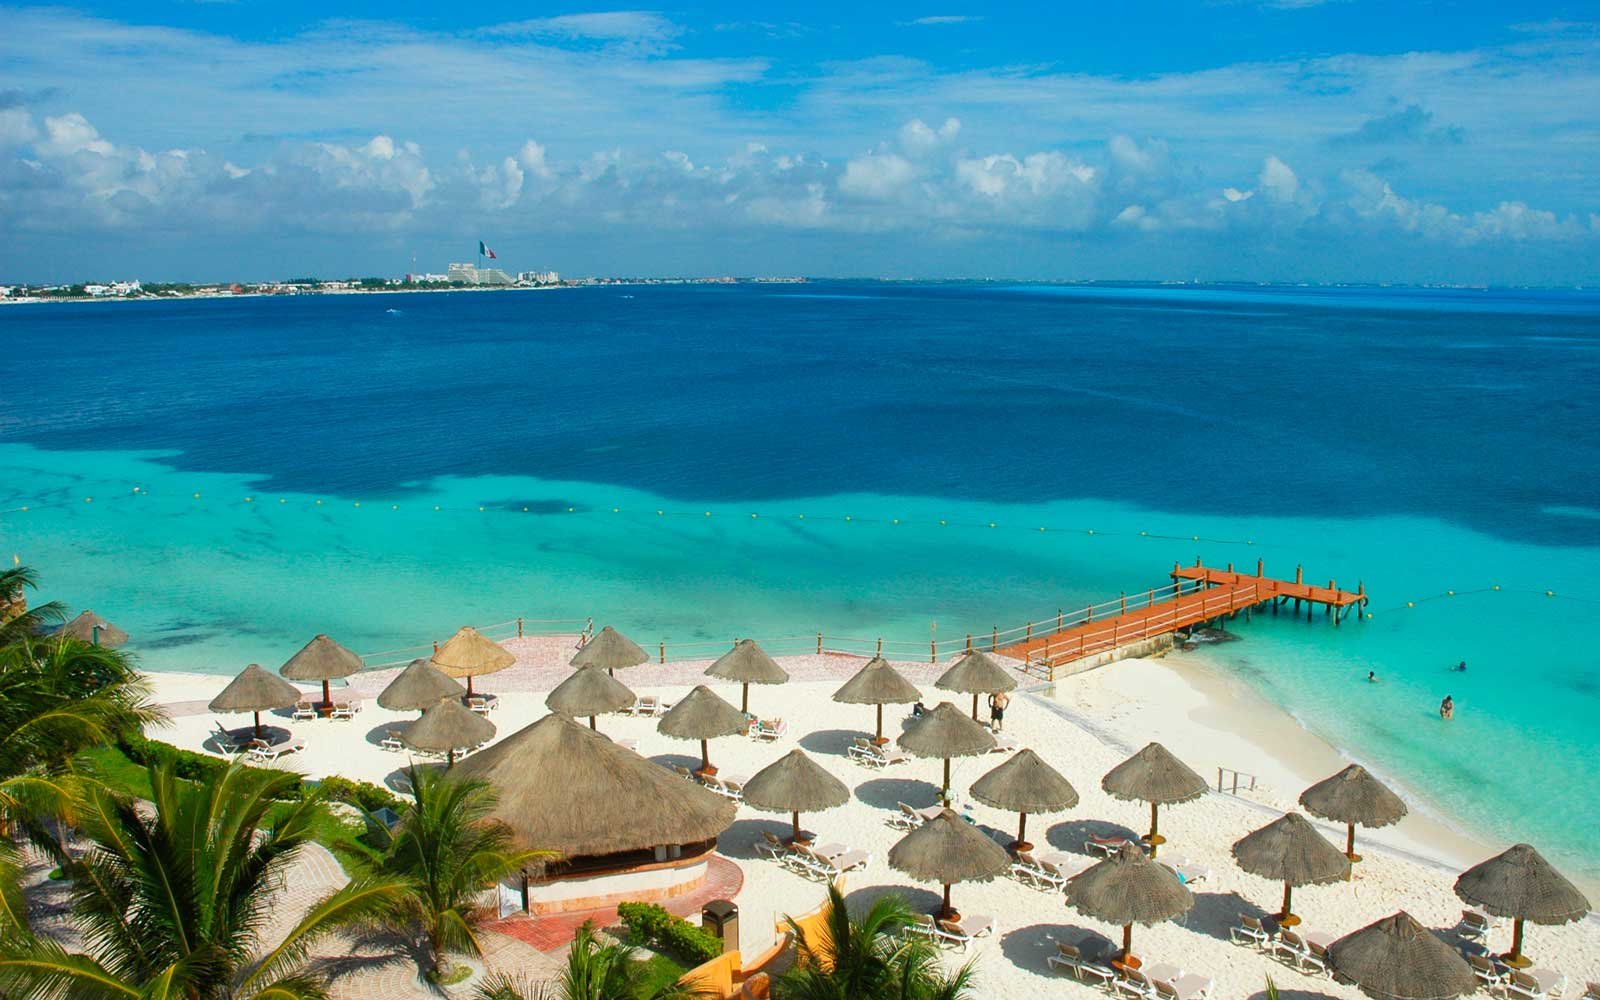 RT Orlando to Cancun Mexico $189 Nonstop Airfares on Spirit Airlines (Travel January - February 2024)